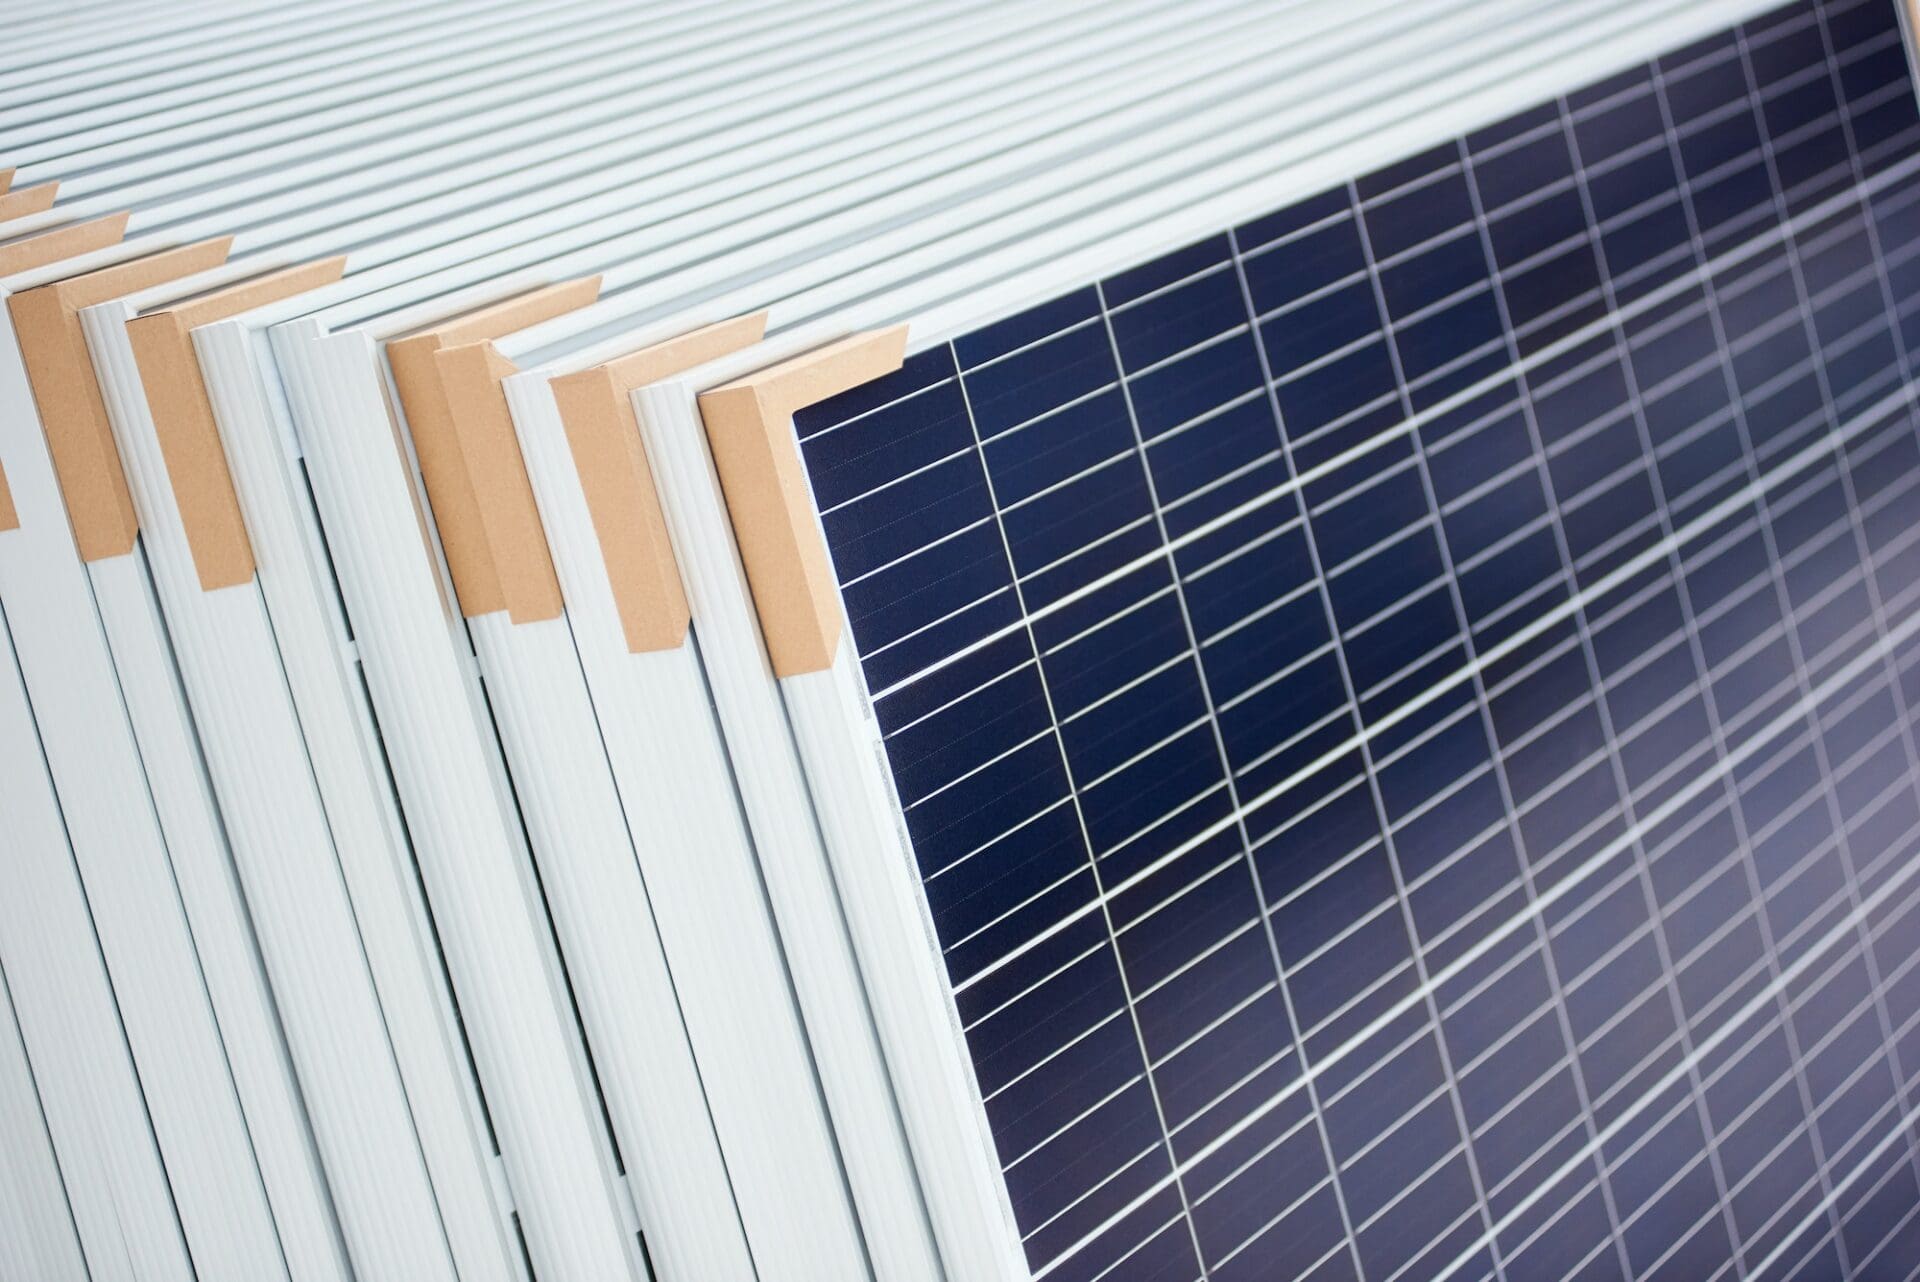 Stack of photovoltaic solar panels.